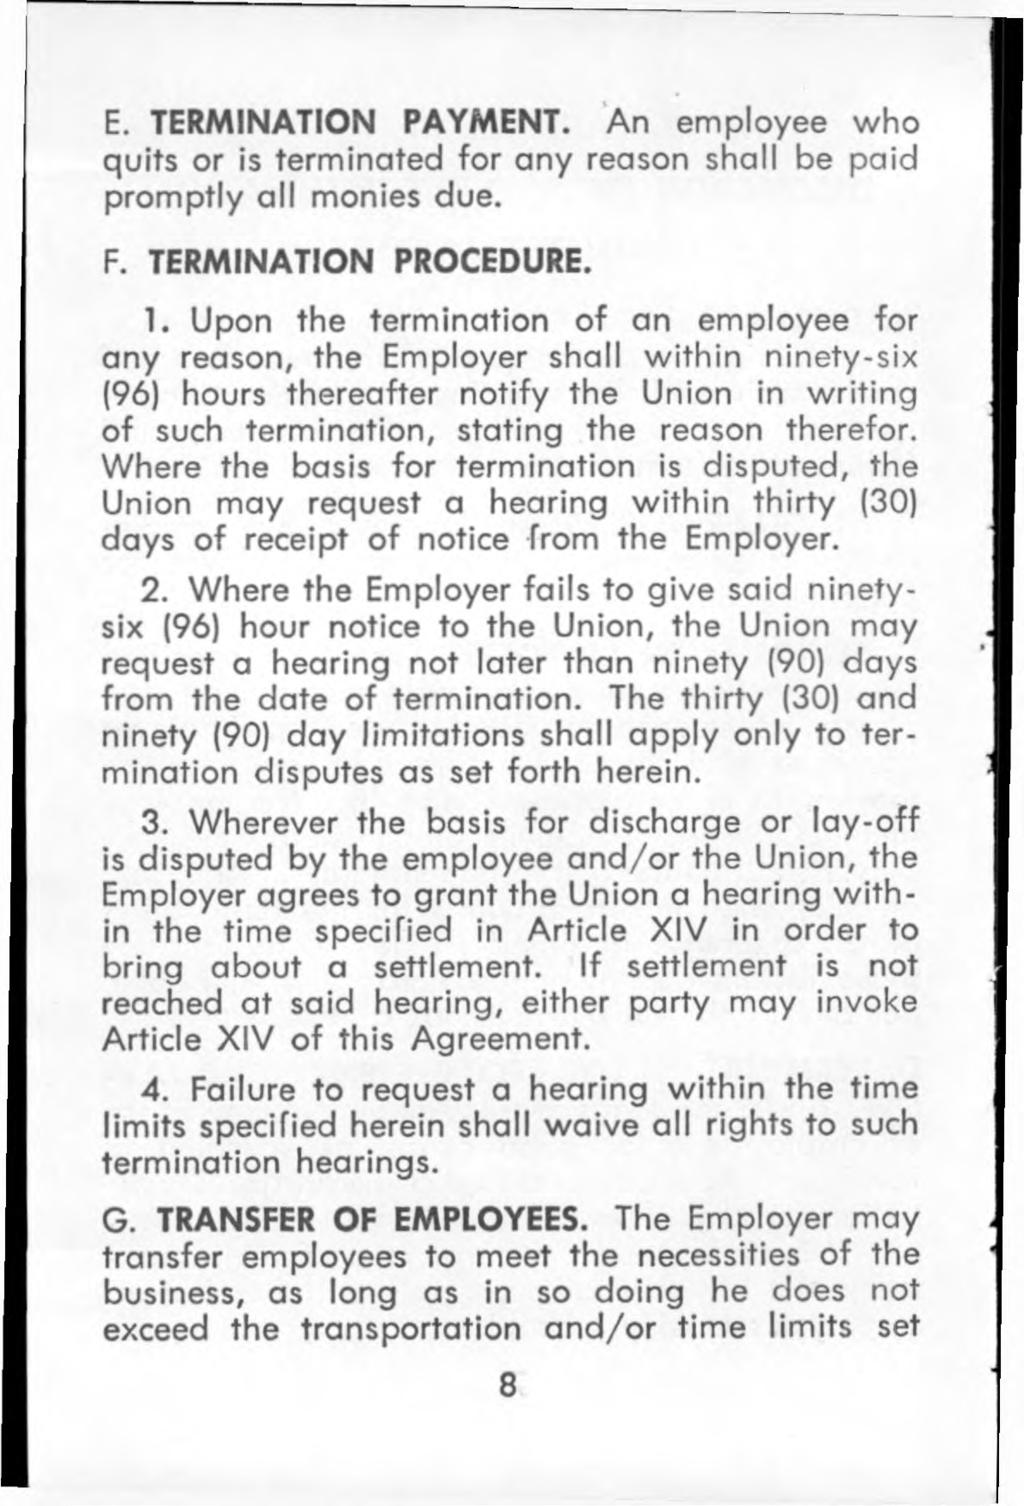 E. TERMINATION PAYMENT. An employee who quits or is term inated for any reason shall be paid prom ptly a ll monies due. F. TERMINATION PROCEDURE. 1.